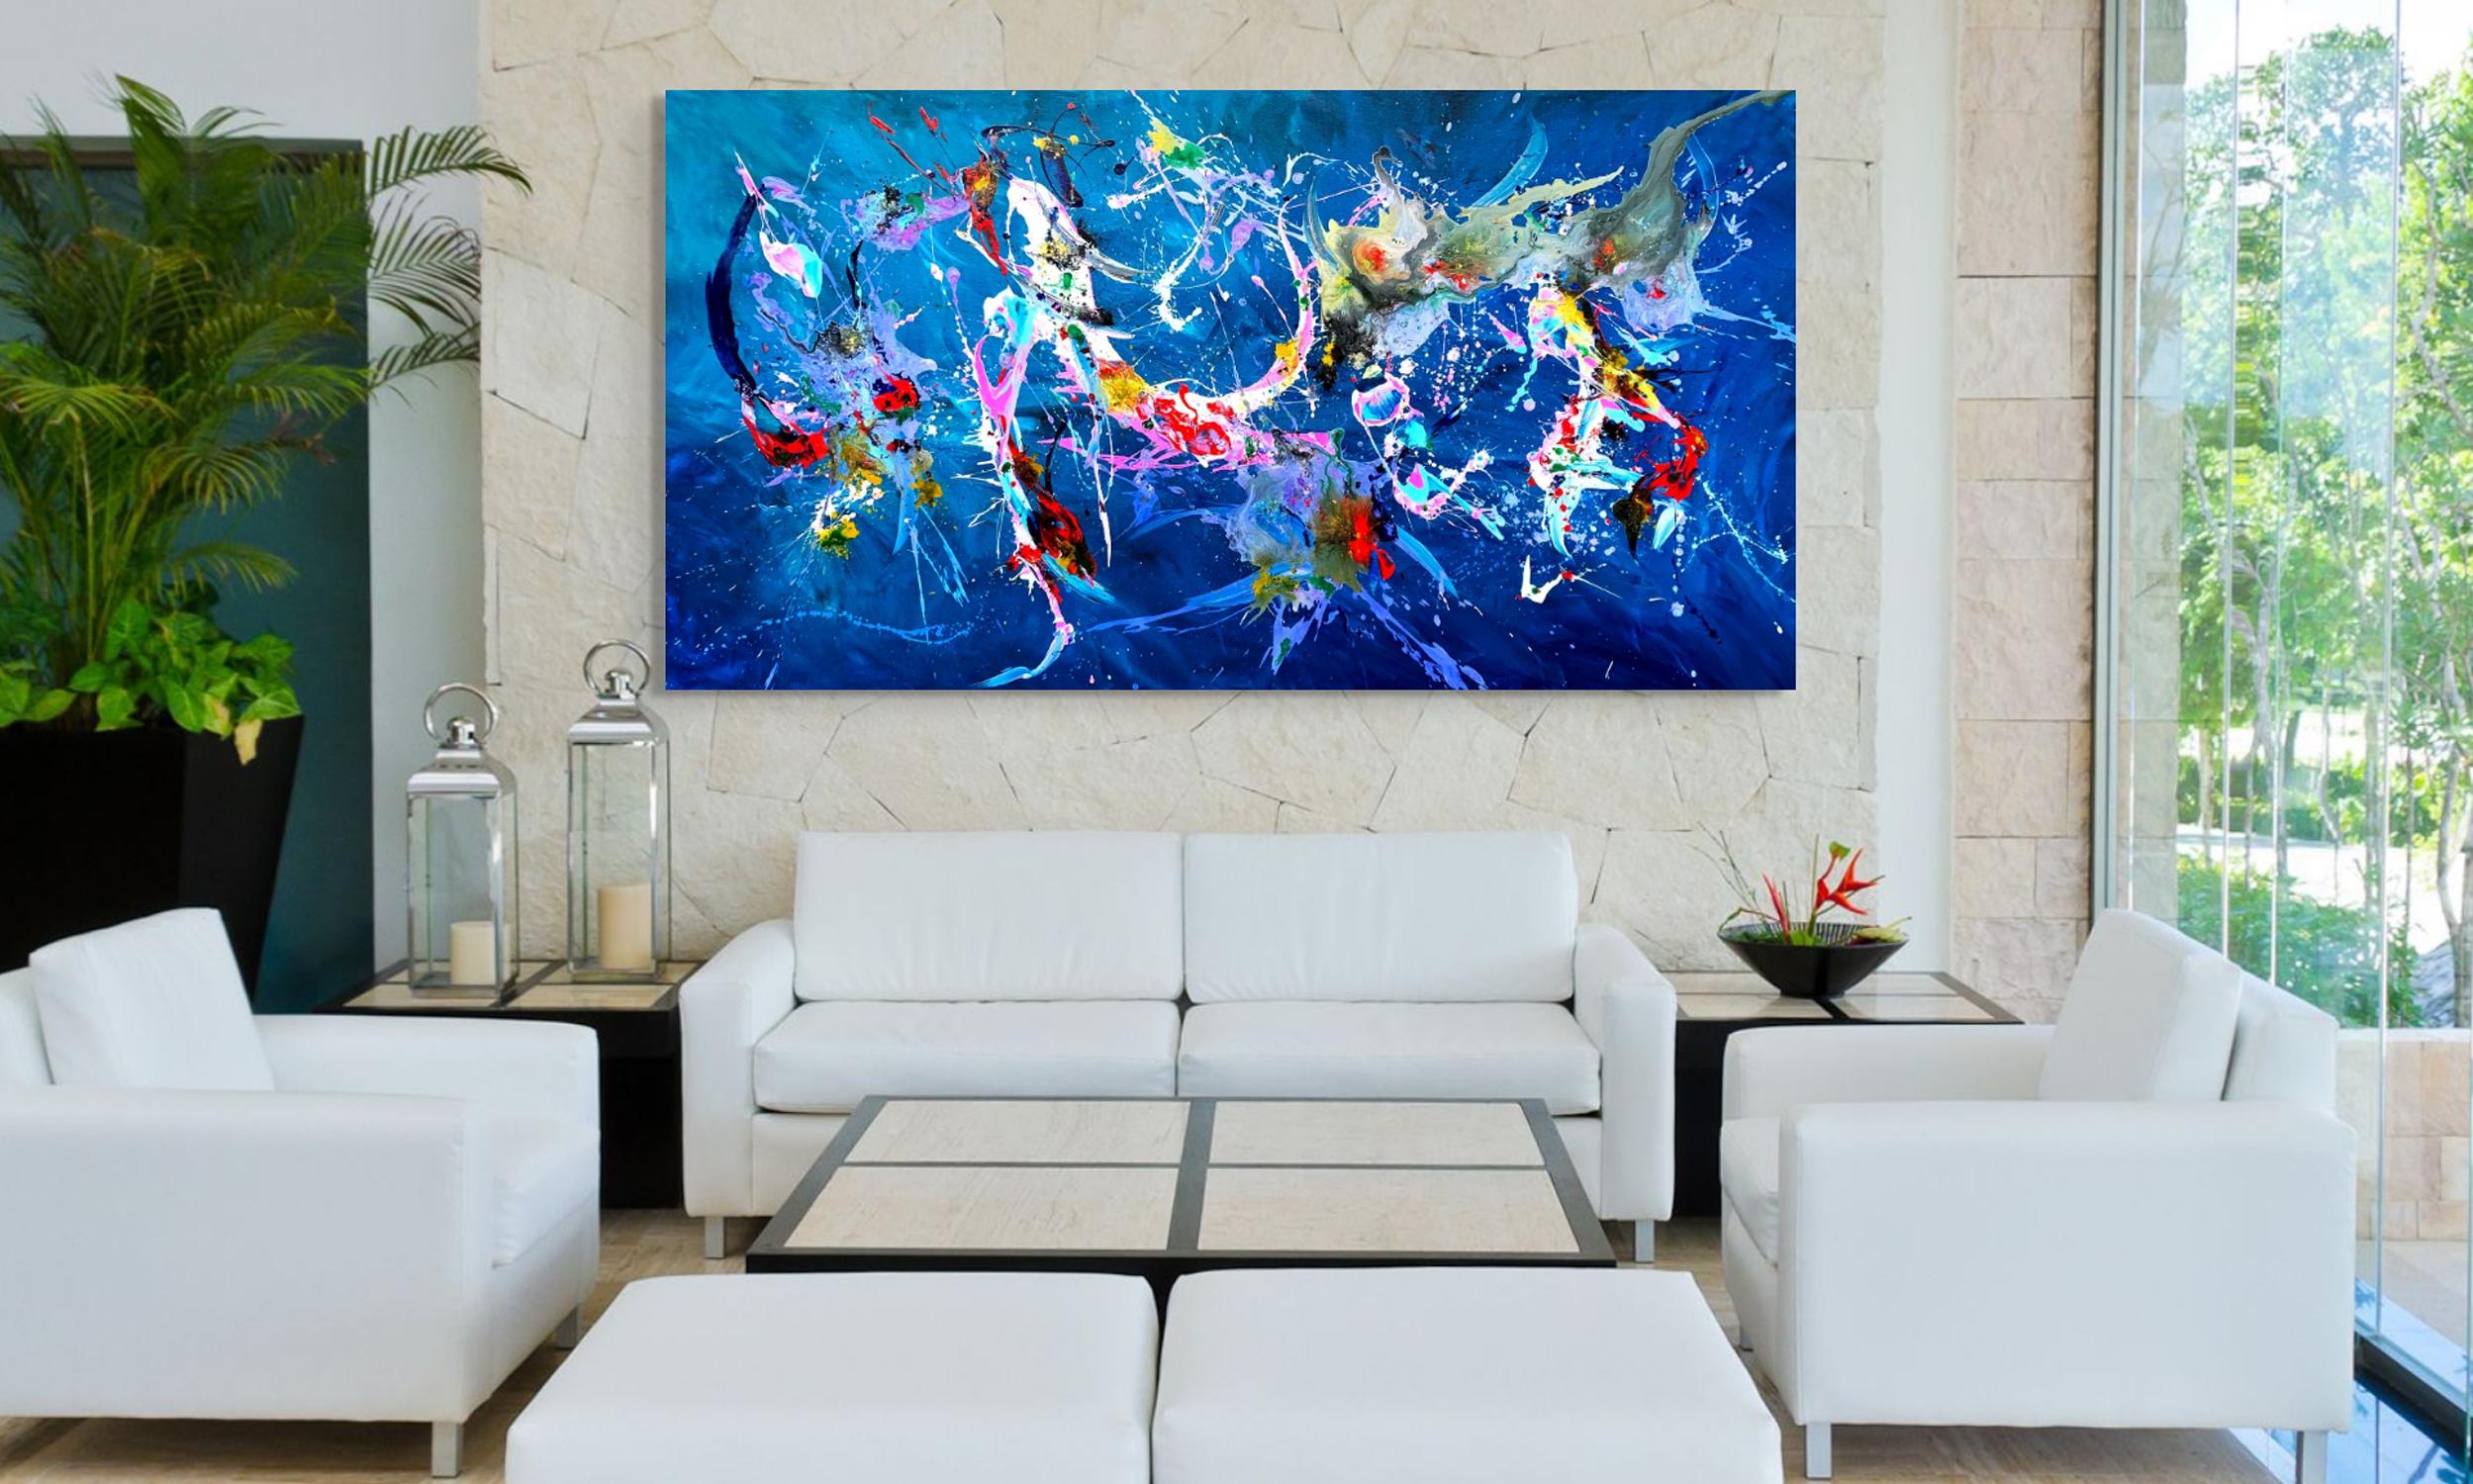 Deep Sea Creatures - Abstract Expressionist Painting by Estelle Asmodelle